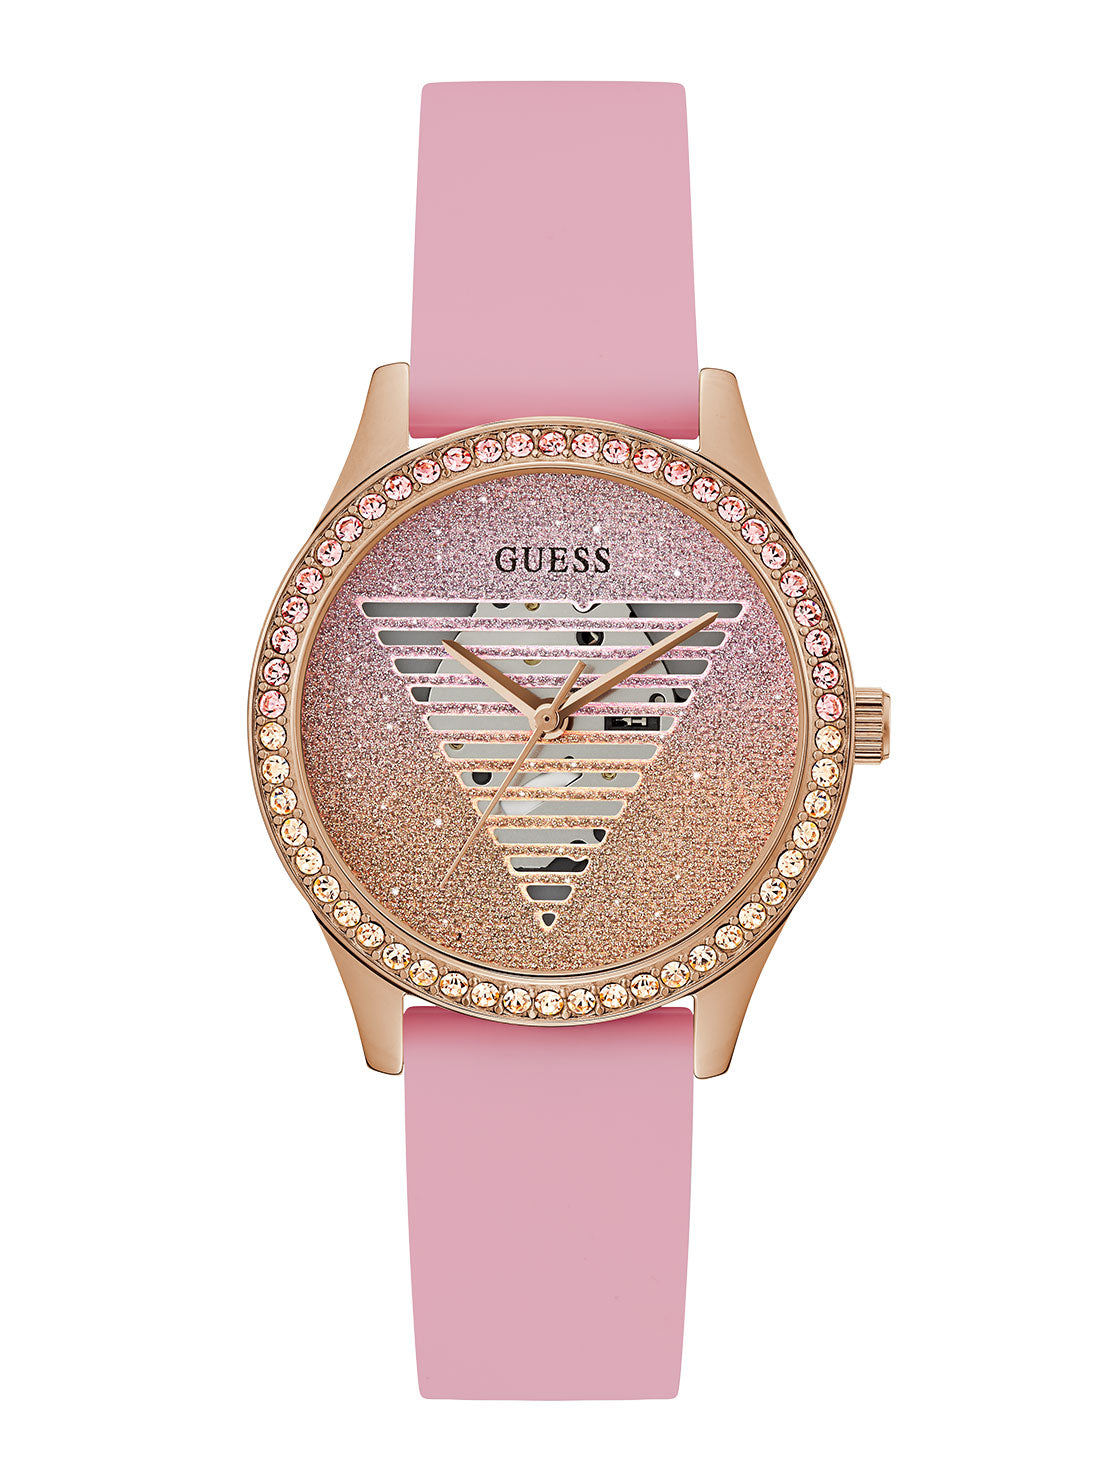 GUESS Women's Pink Lady Idol Silicone Watch GW0530L4 Front View